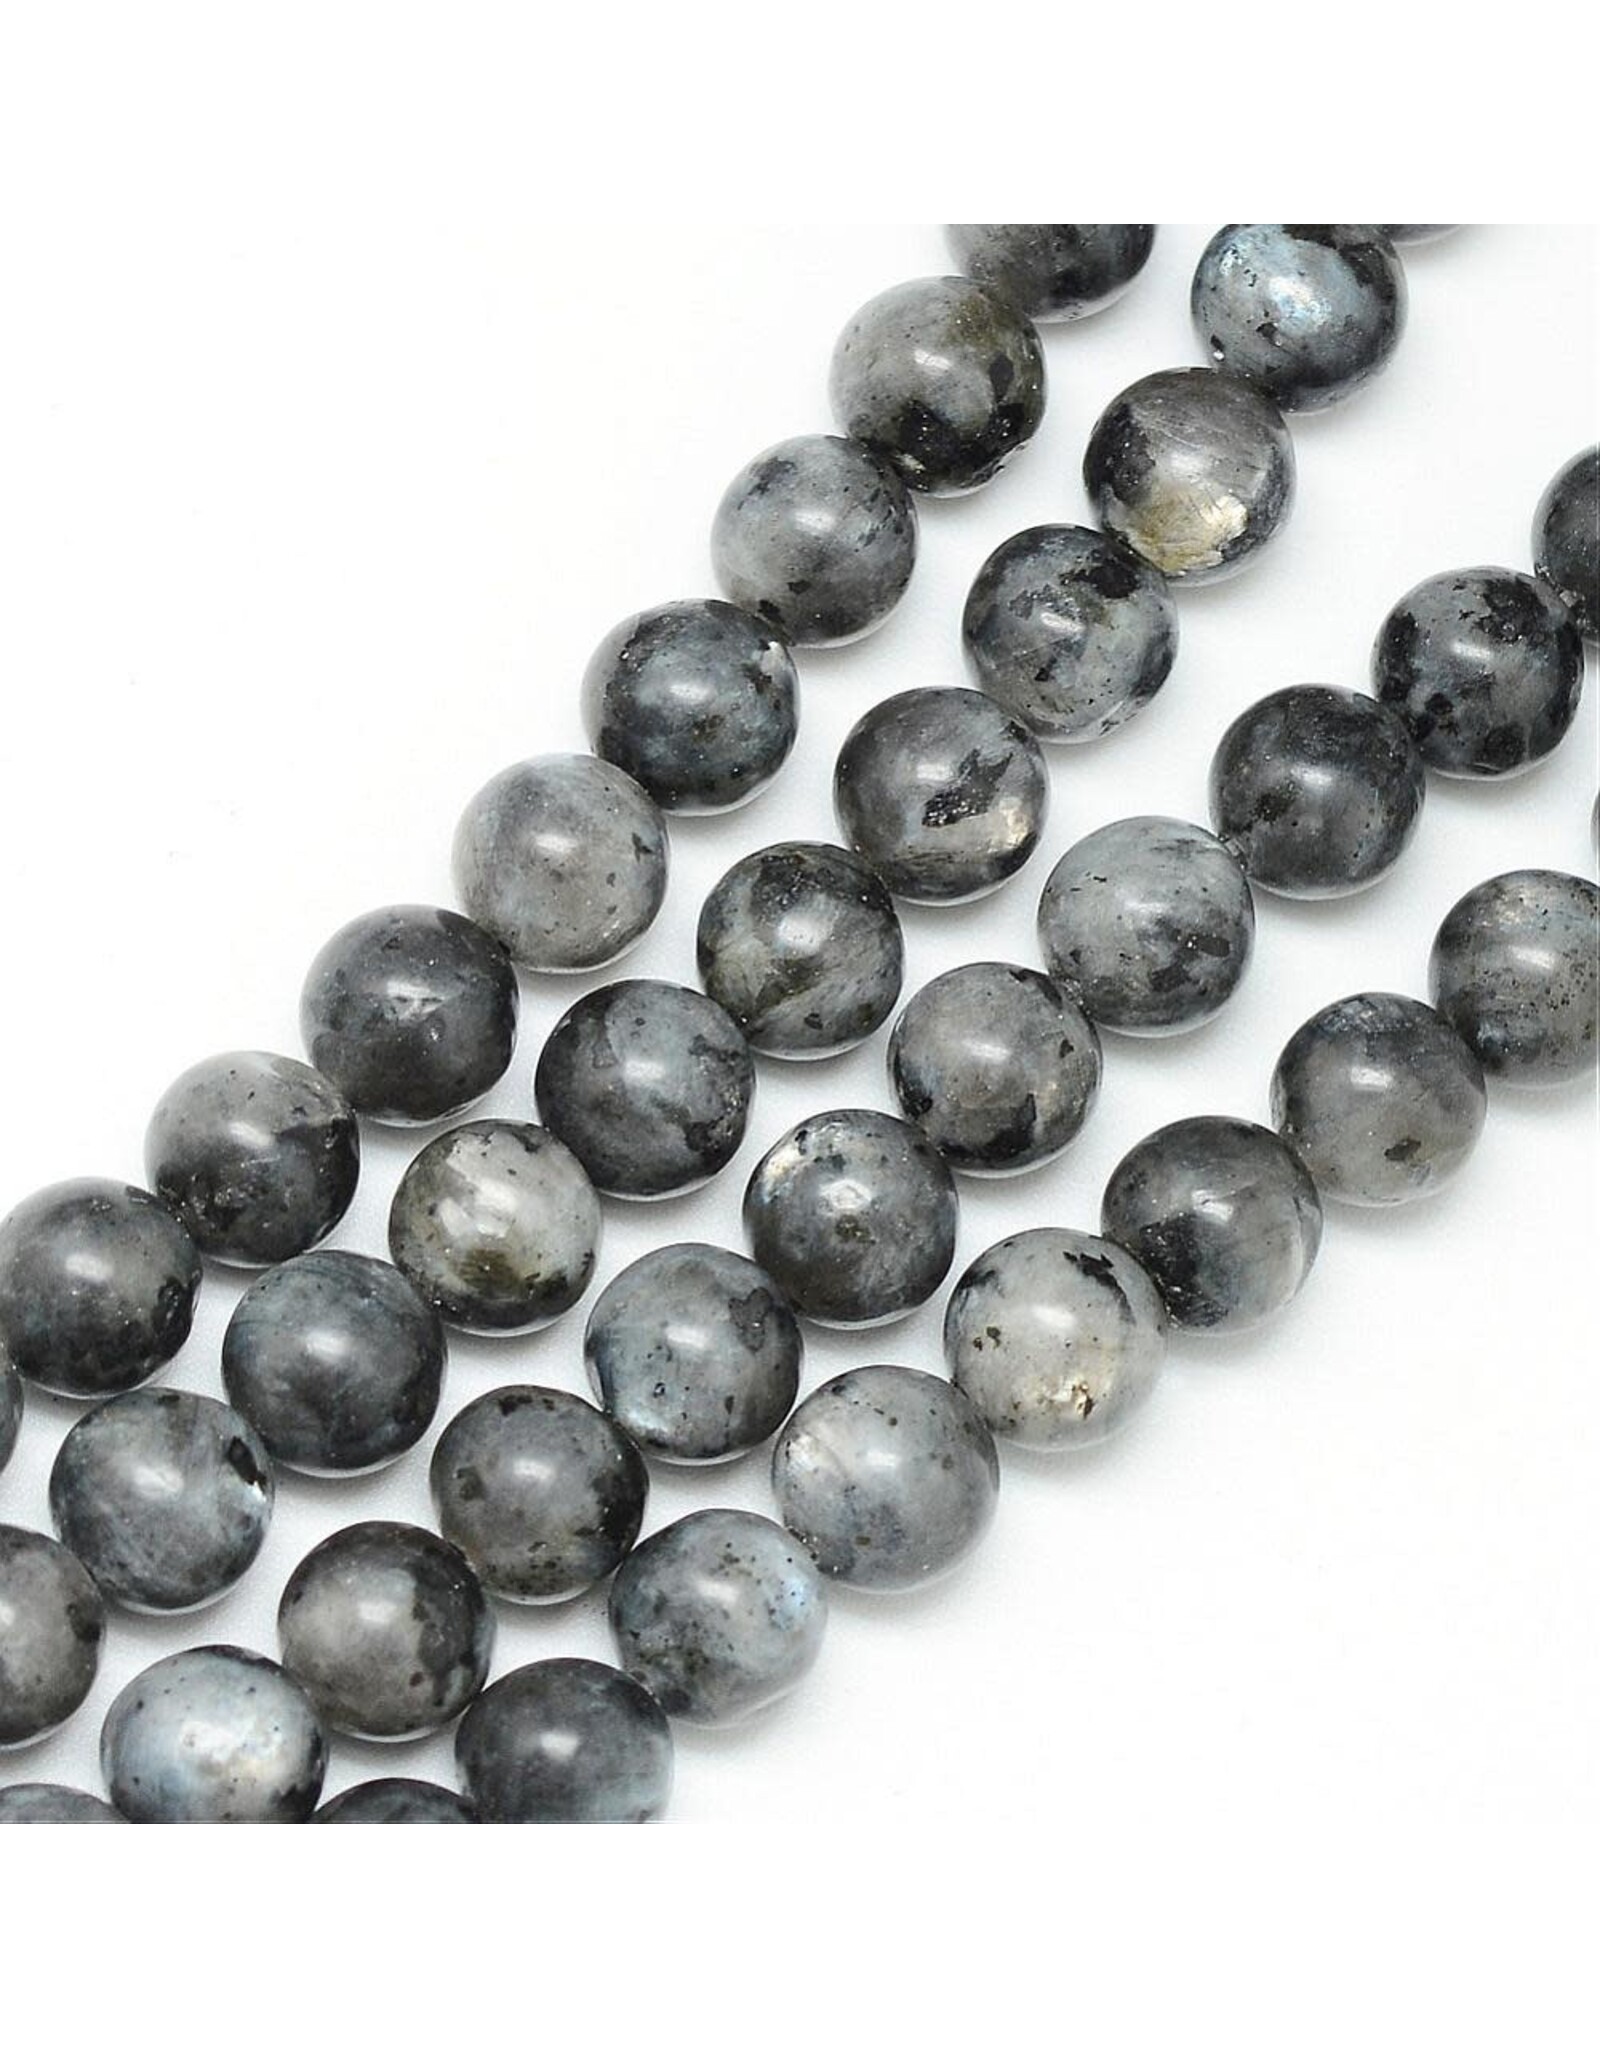 Labradorite 4mm Black Grey 15” Strand apprx 90 beads - Strung Out On Beads